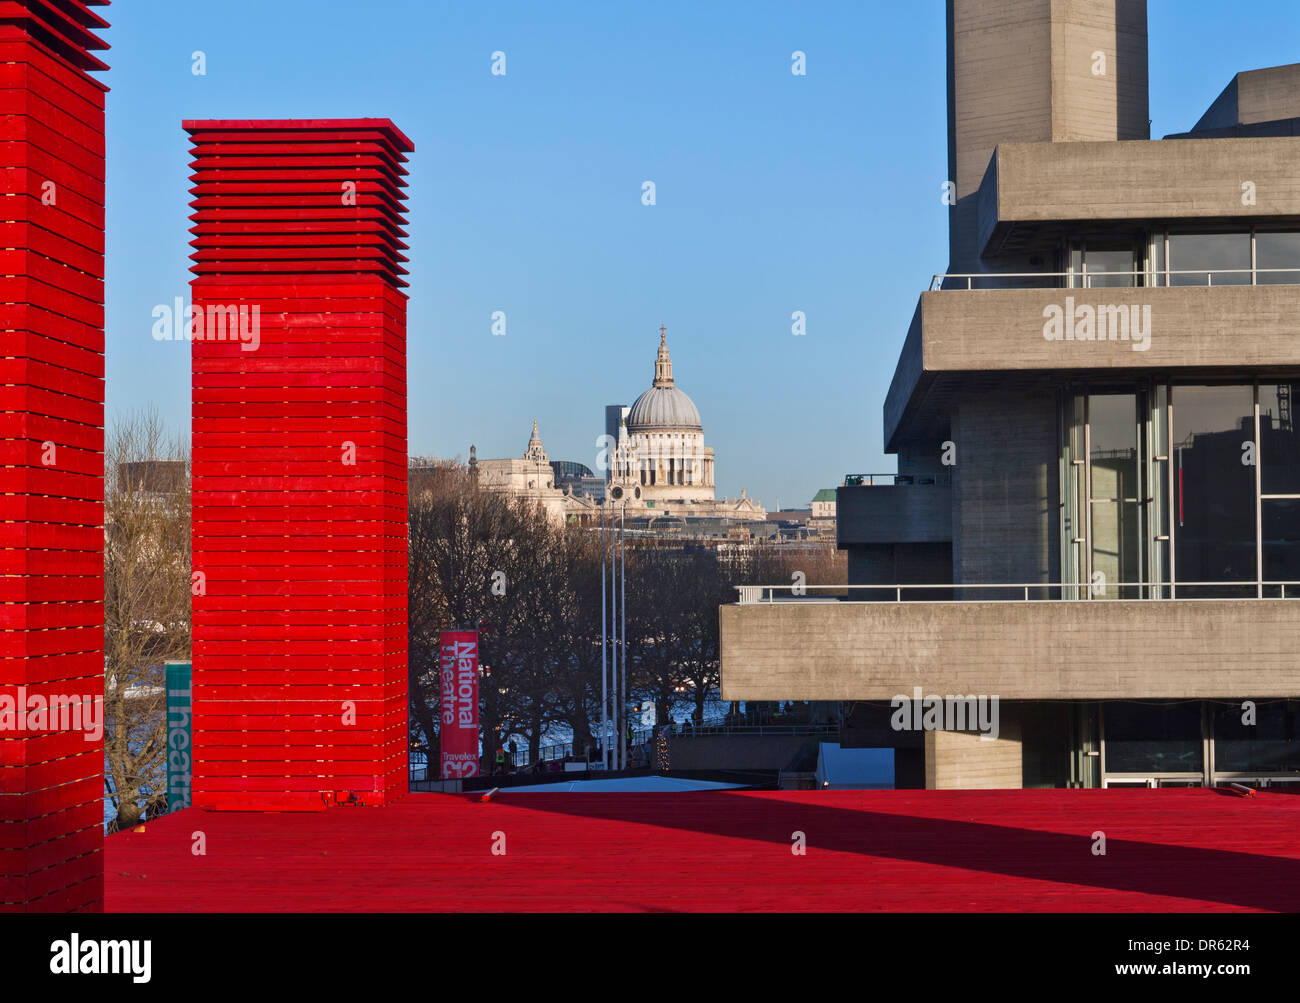 National Theatre entrance structure framing Saint Paul's cathedral South Bank River Thames London UK Stock Photo